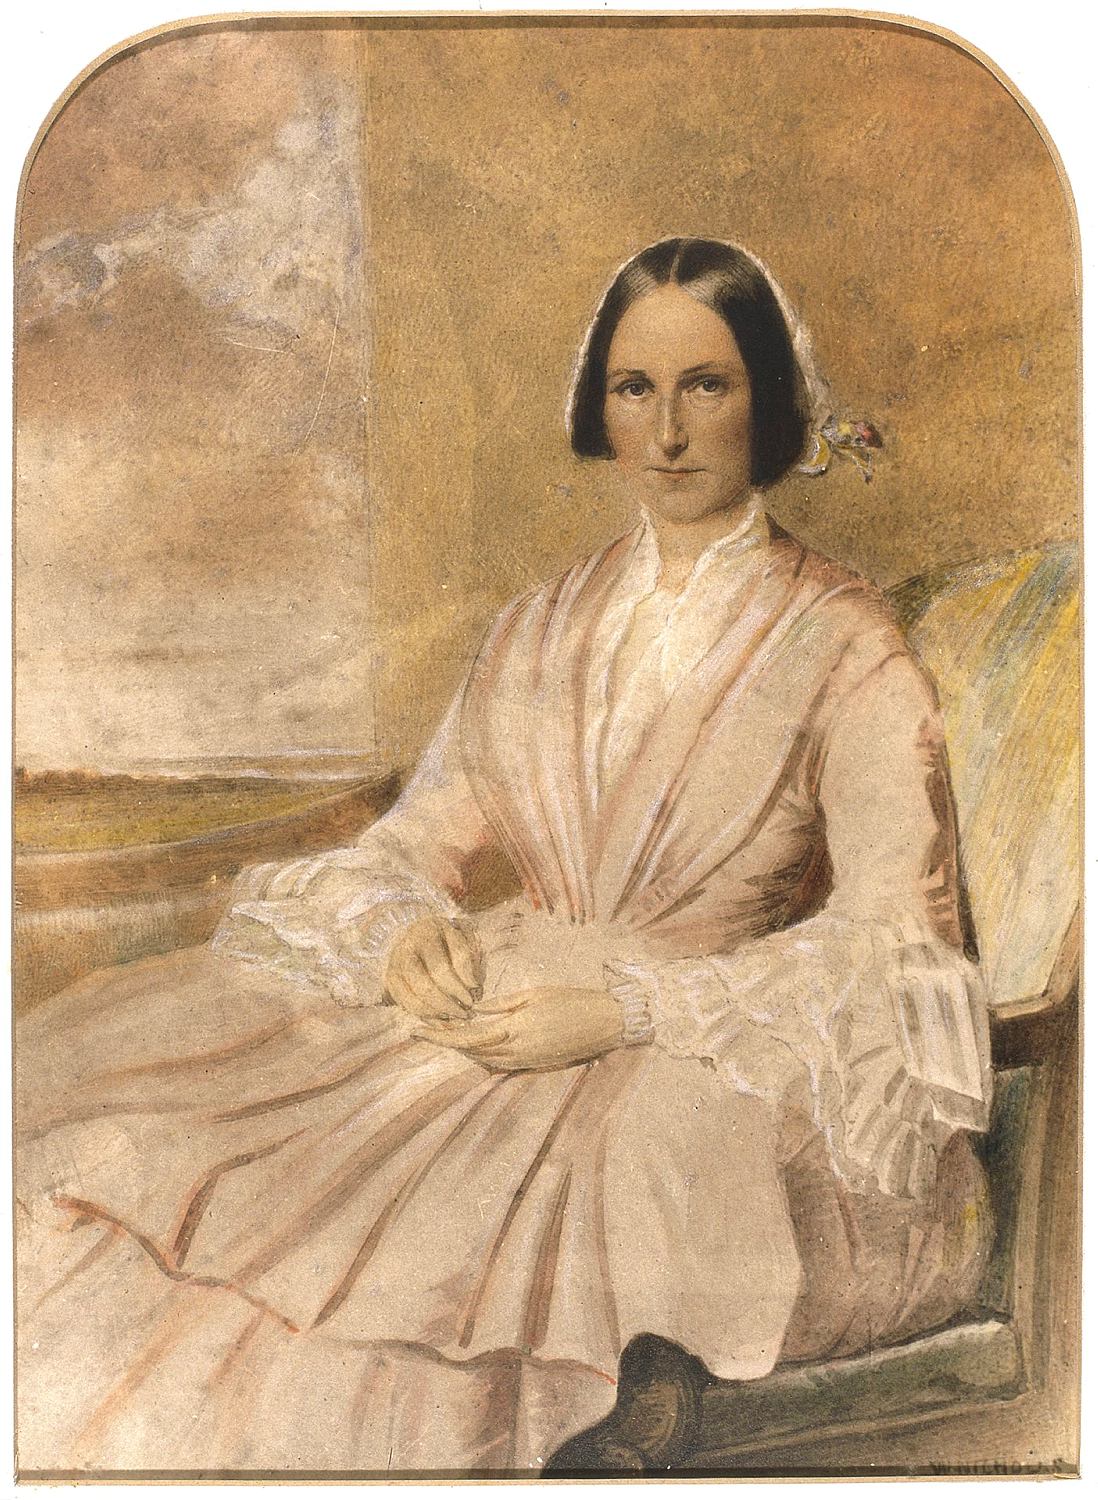 Framed watercolour portrait of Sarah Wentworth 1805-1880. She is seated and looks directly at the viewer. Wears a pink dress with white lace decoration.